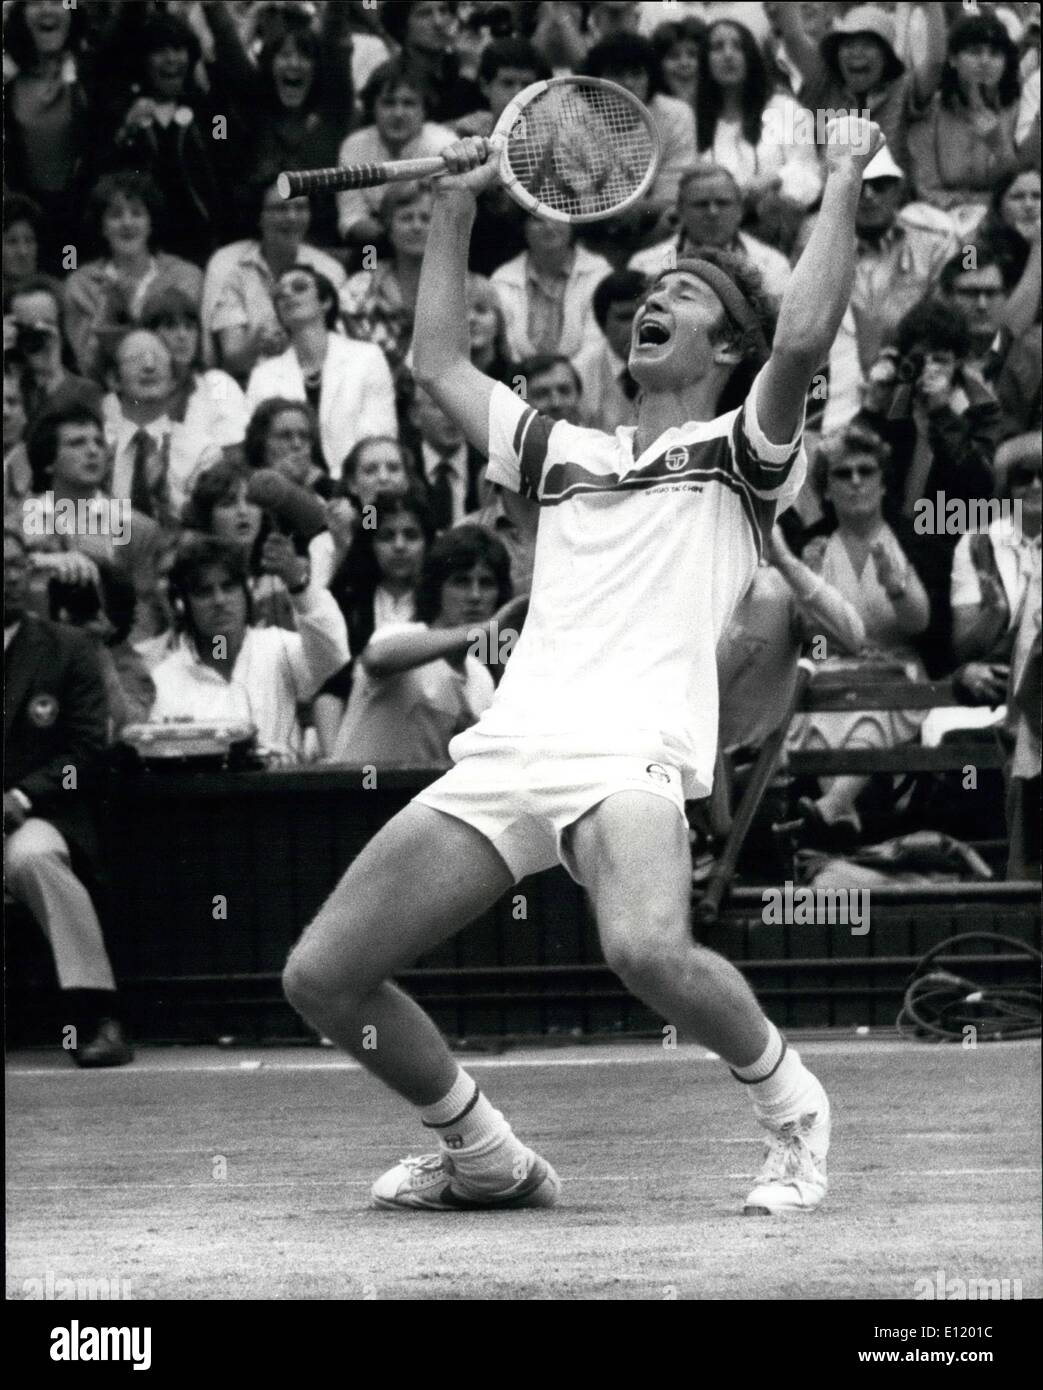 Jul. 07, 1981 - McEnroe wins the Wimbledon title: American John McEnroe became the Wimbledon champion on Saturday when he beat the holder of the title for the last five years, Bjorn Borg. 6-4, 6-7, 6-7, 4-6. Photo shows John McEnroe at the moment of victory after winning the men singles title on the centre court at Wimbledon. Stock Photo